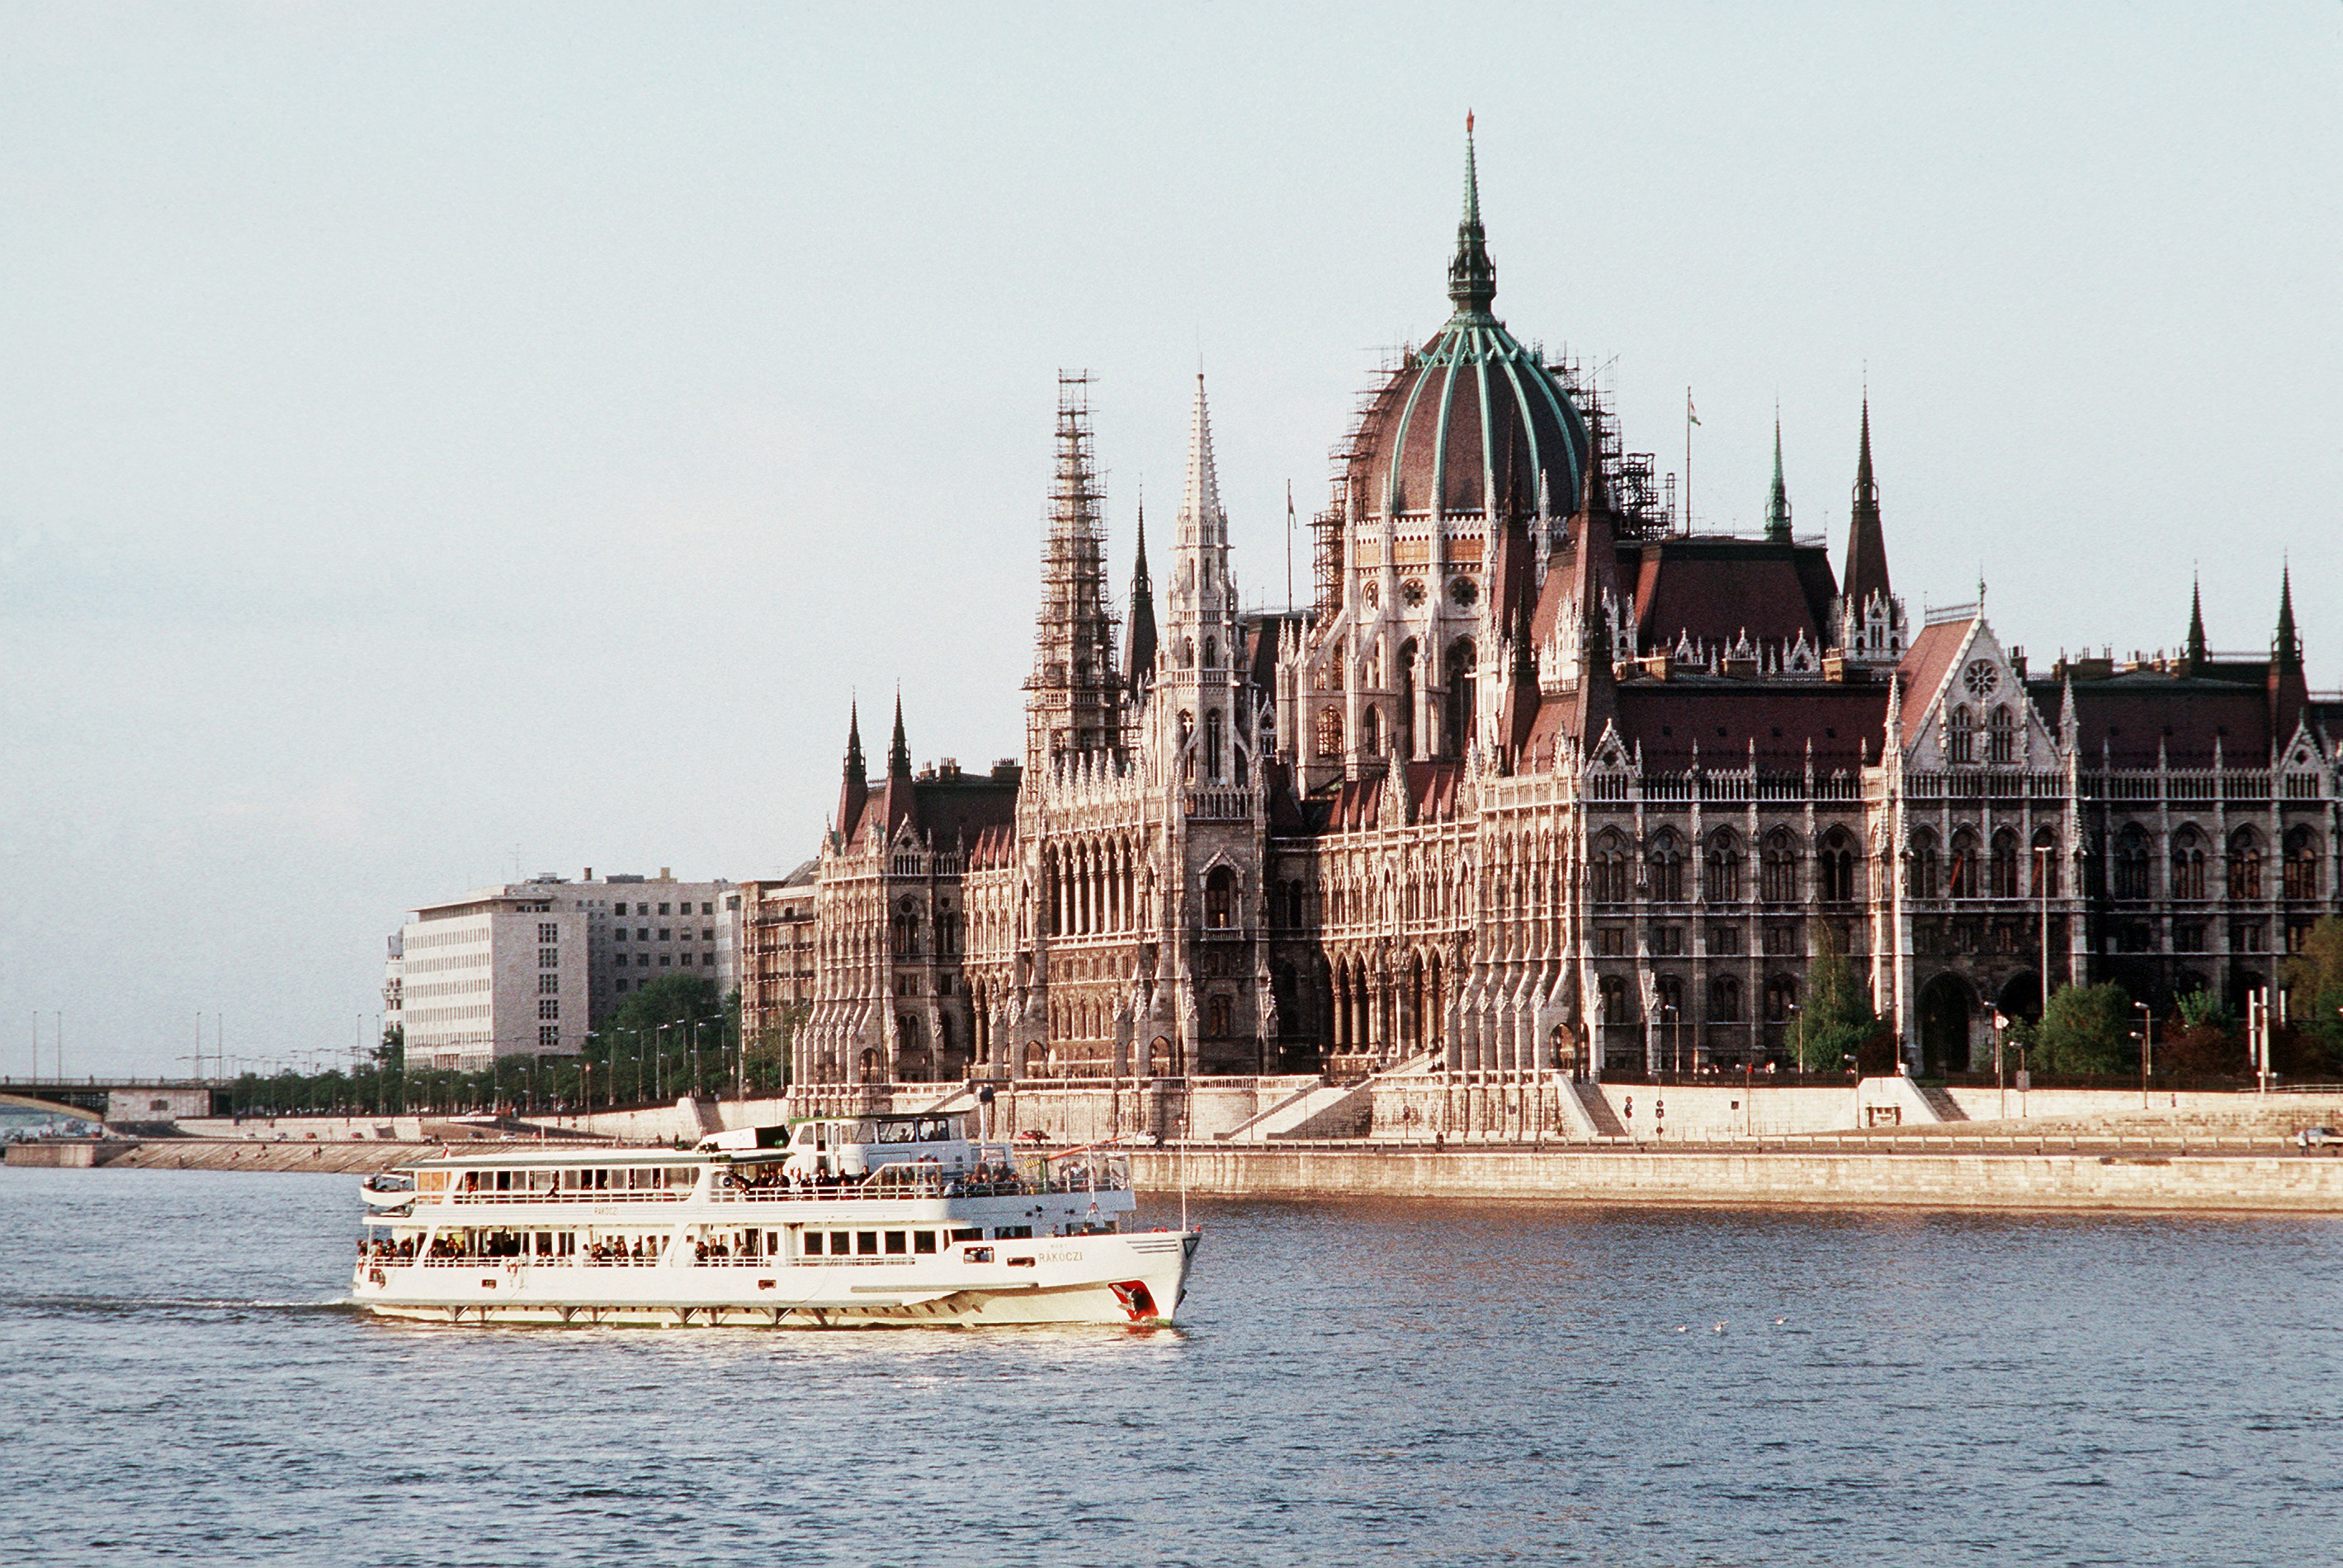 Hungary's Parliament building in 1991